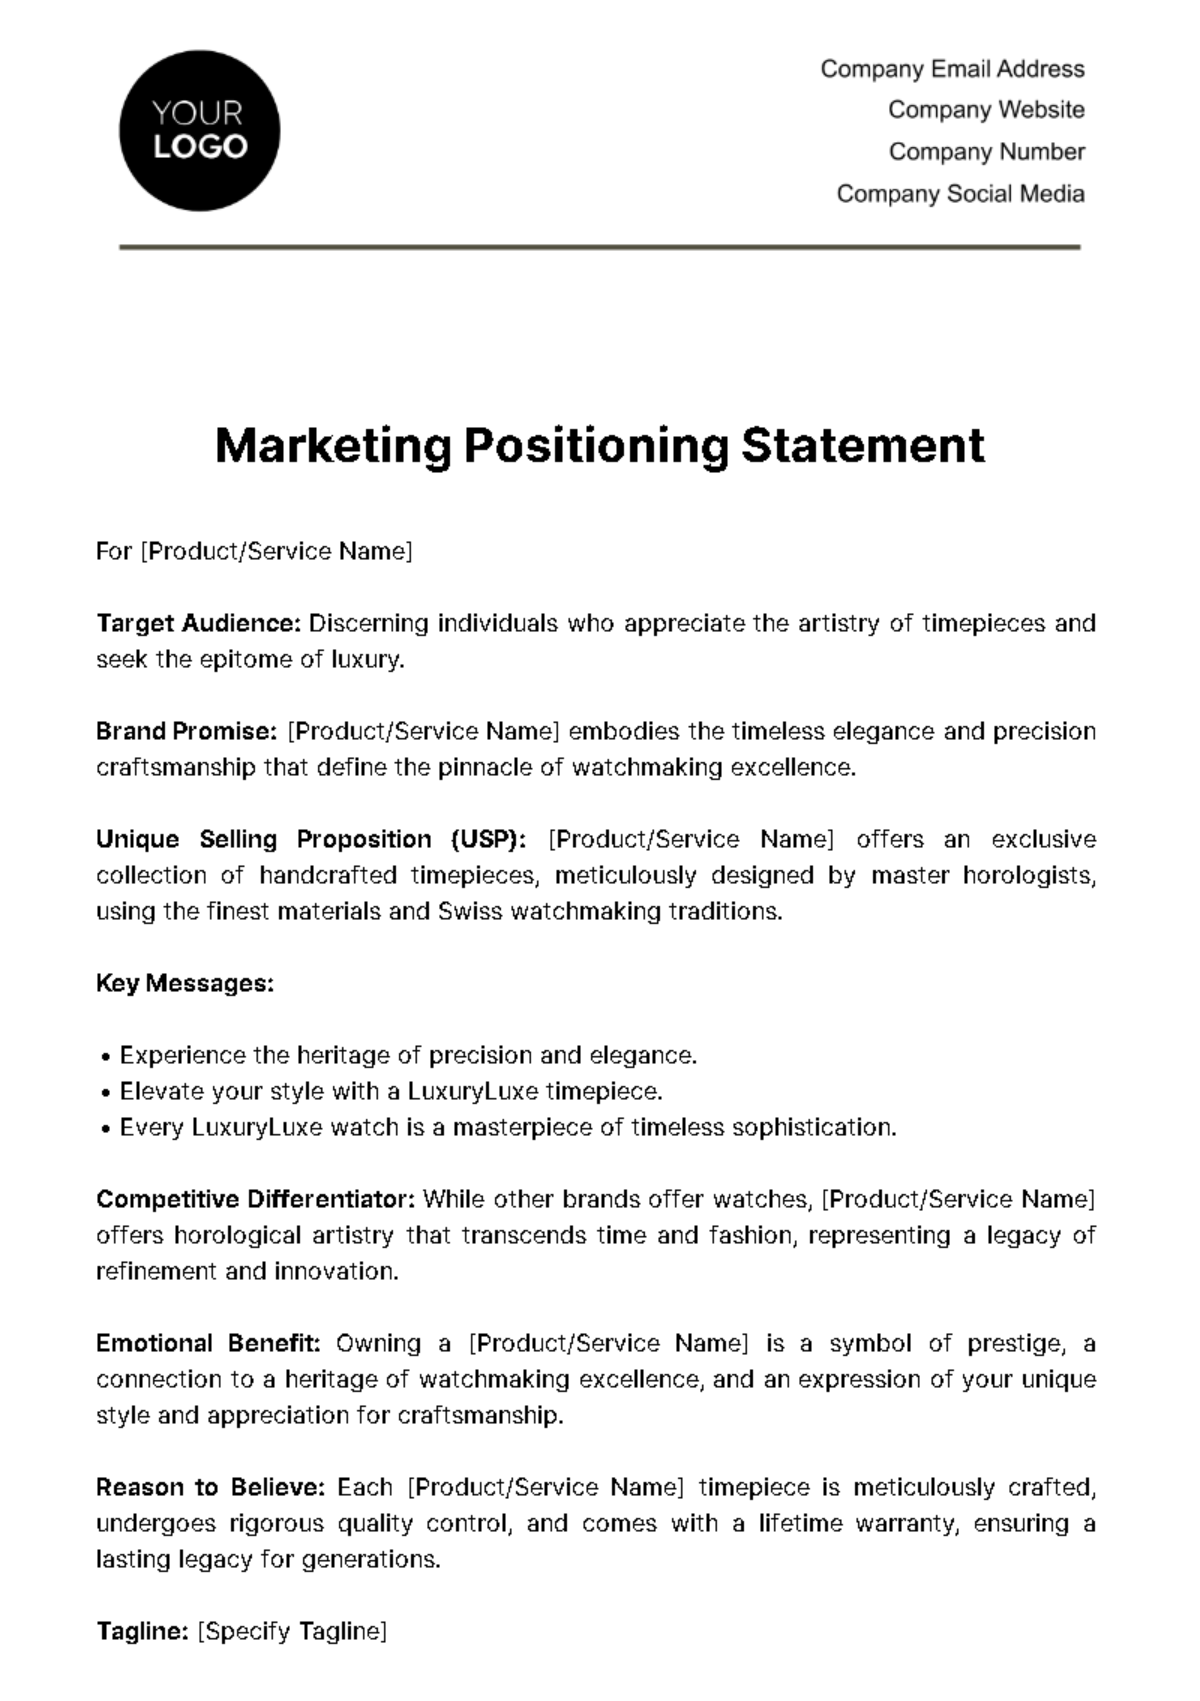 Free Marketing Positioning Statement Template